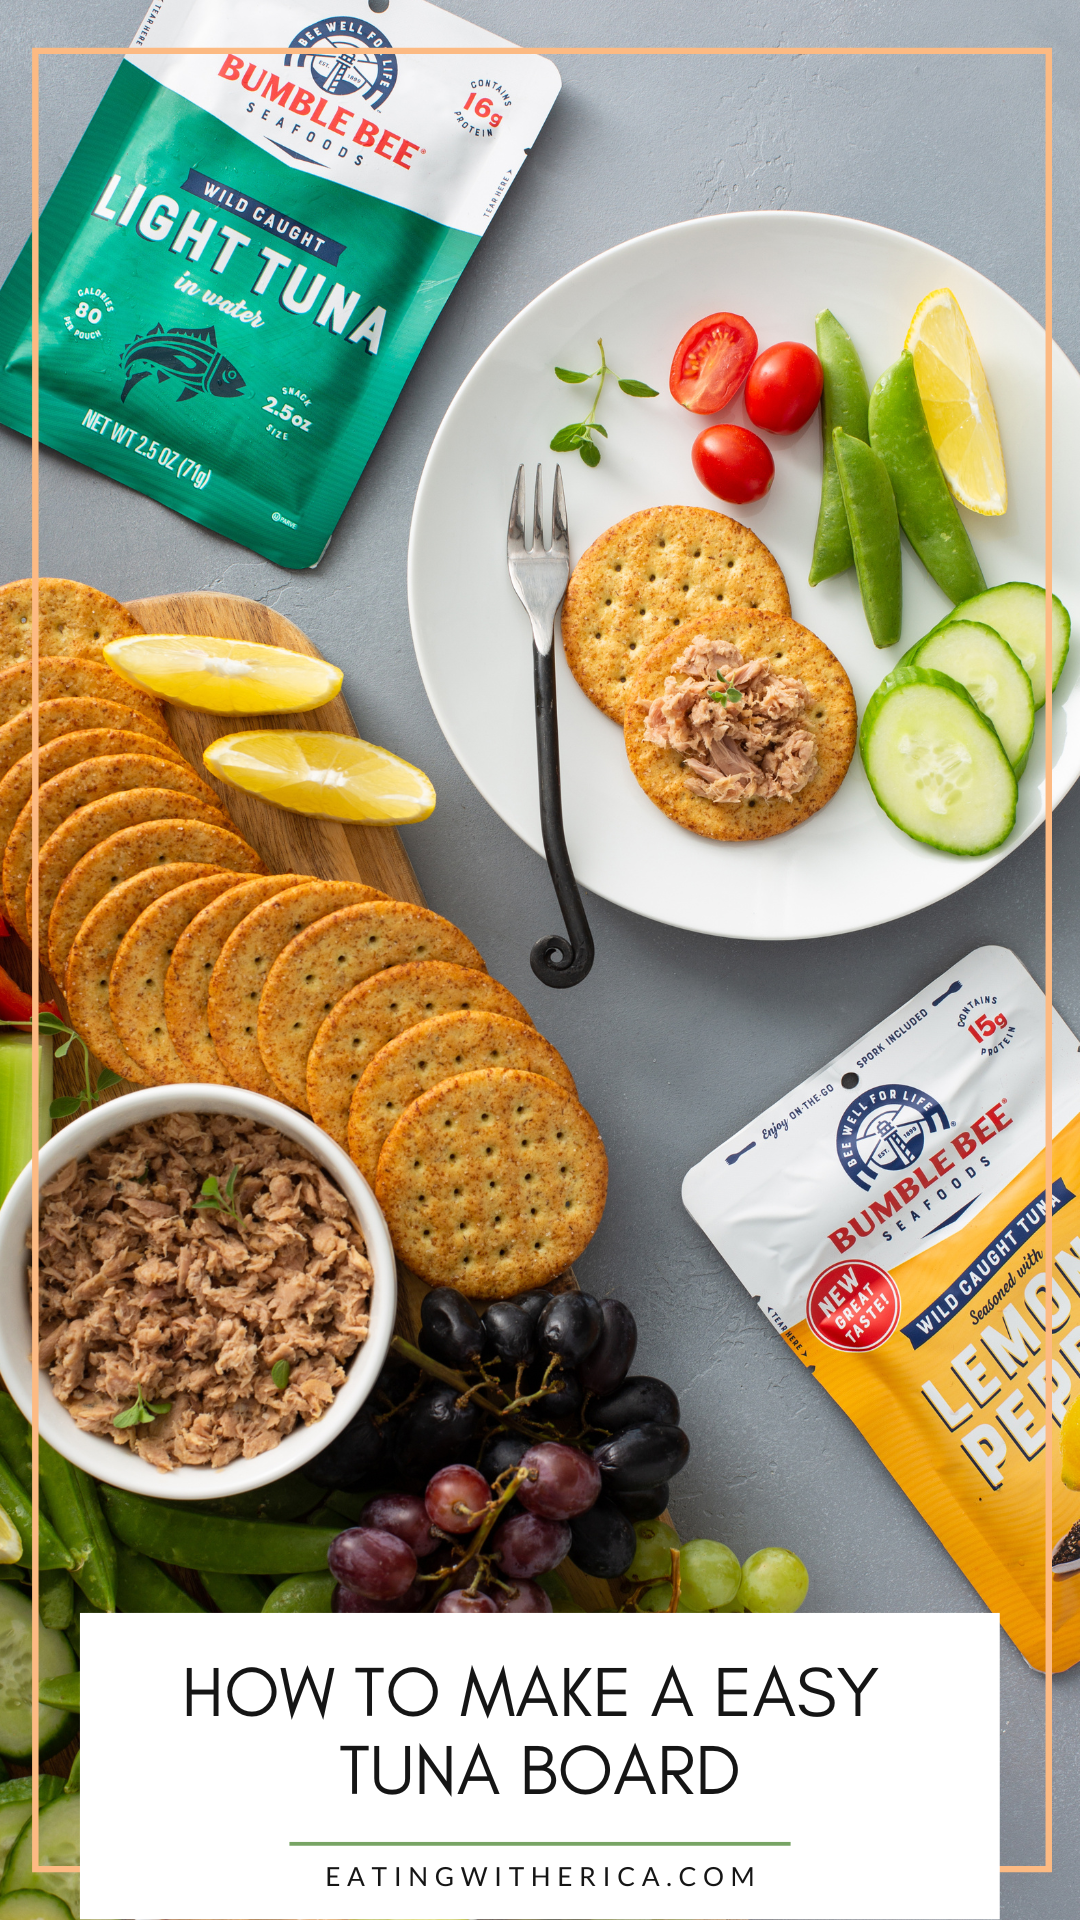 Build your own delicious tuna snack from ingredients to topping and more with this delicious Tuna Board idea.  Set out a tuna mixture, your favorite crackers, fresh topping, fruits, and more- and voila- an easy snack that everyone will love!  CLICK HERE to make the recipe!